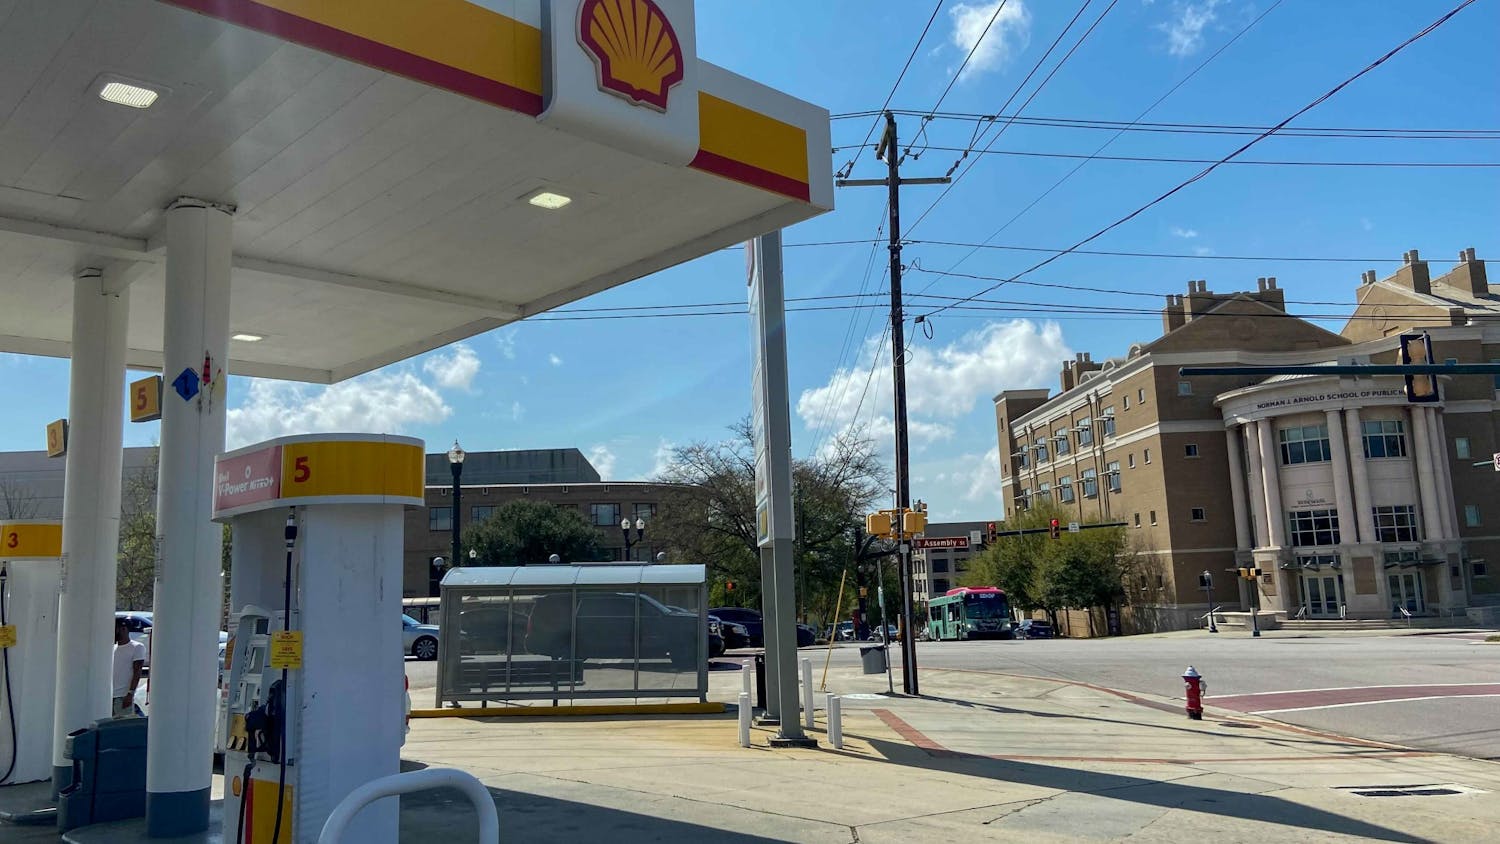 FILE — An exterior photo of a Shell gas station on Assembly Street. An armed robbery occurred early Friday morning inside of the Shell's convenience store, the Corner Pantry.&nbsp;